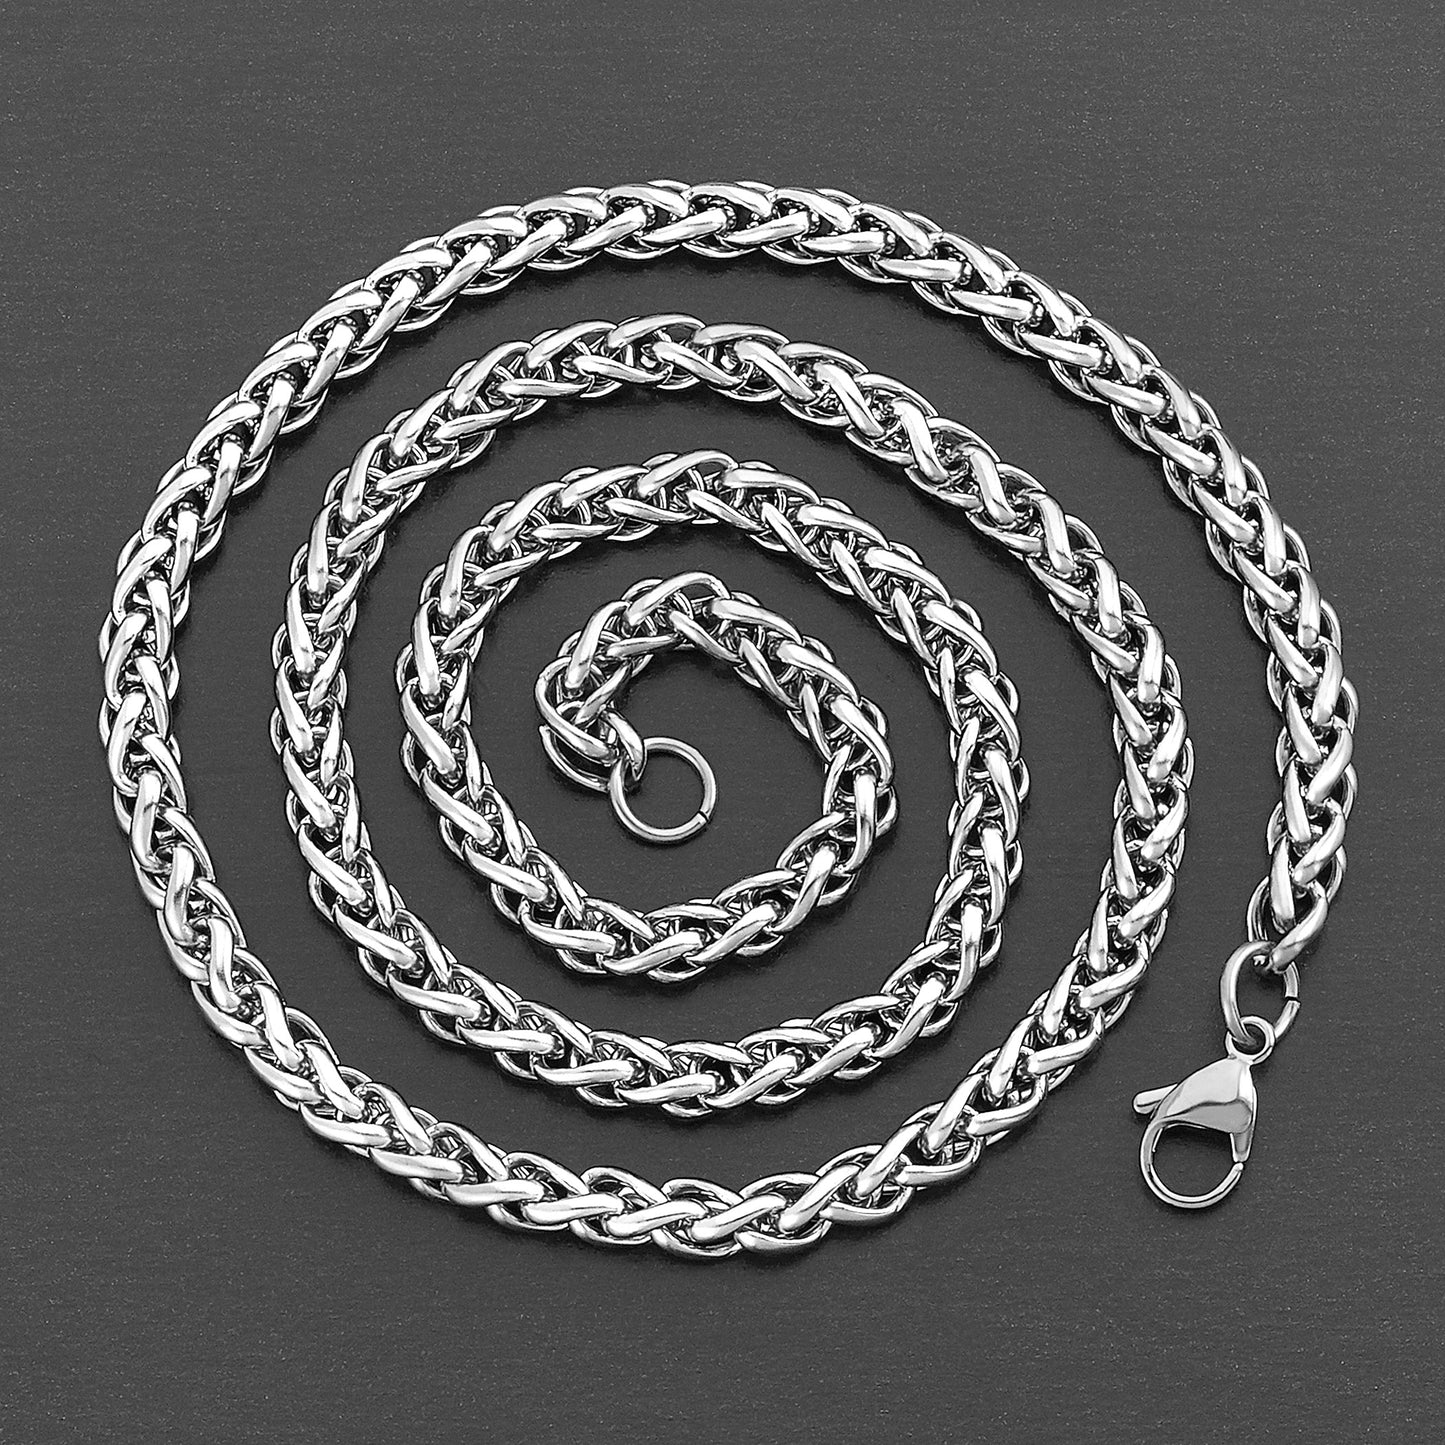 Men's Polished Spiga Chain Stainless Steel Necklace